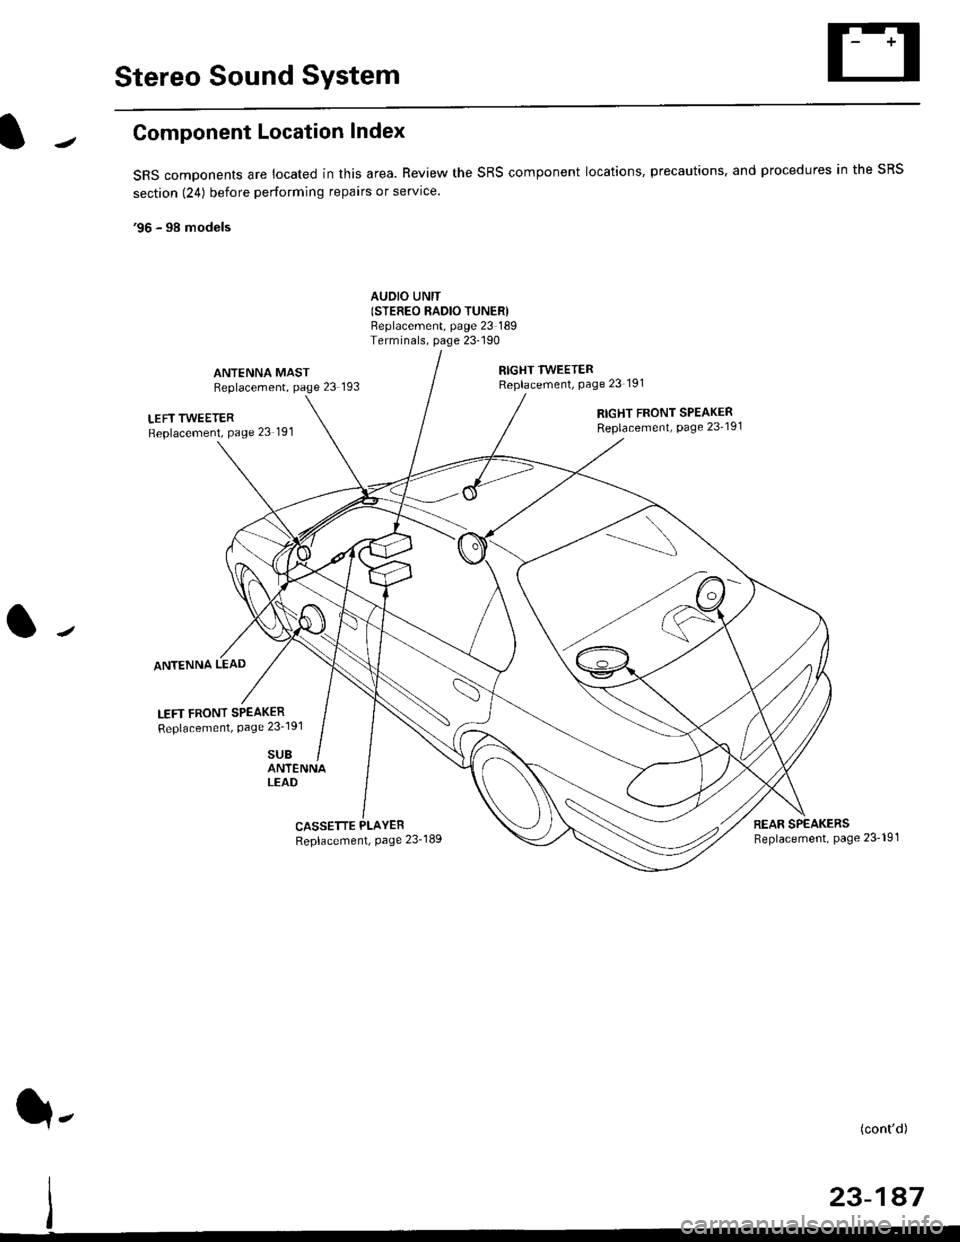 HONDA CIVIC 2000 6.G Workshop Manual Stereo Sound System
Component Location Index
SRS components are located in this area. Review the SRS component locations, precautions. and procedures in the SRS
section (24) before performing repairs 